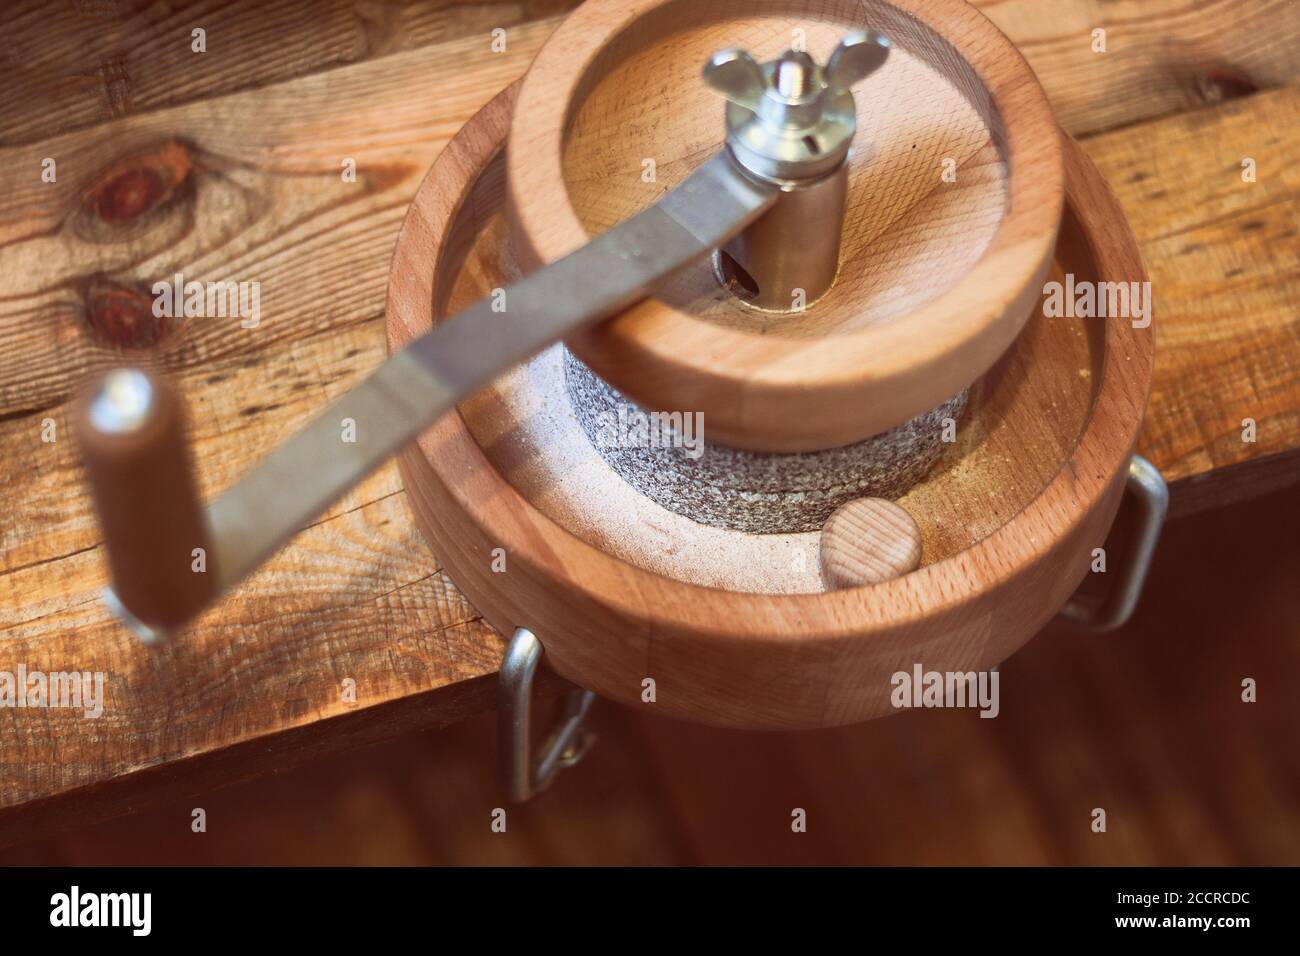 https://c8.alamy.com/comp/2CCRCDC/grain-grinder-manual-grain-mill-for-hand-grinding-on-a-wooden-table-2CCRCDC.jpg